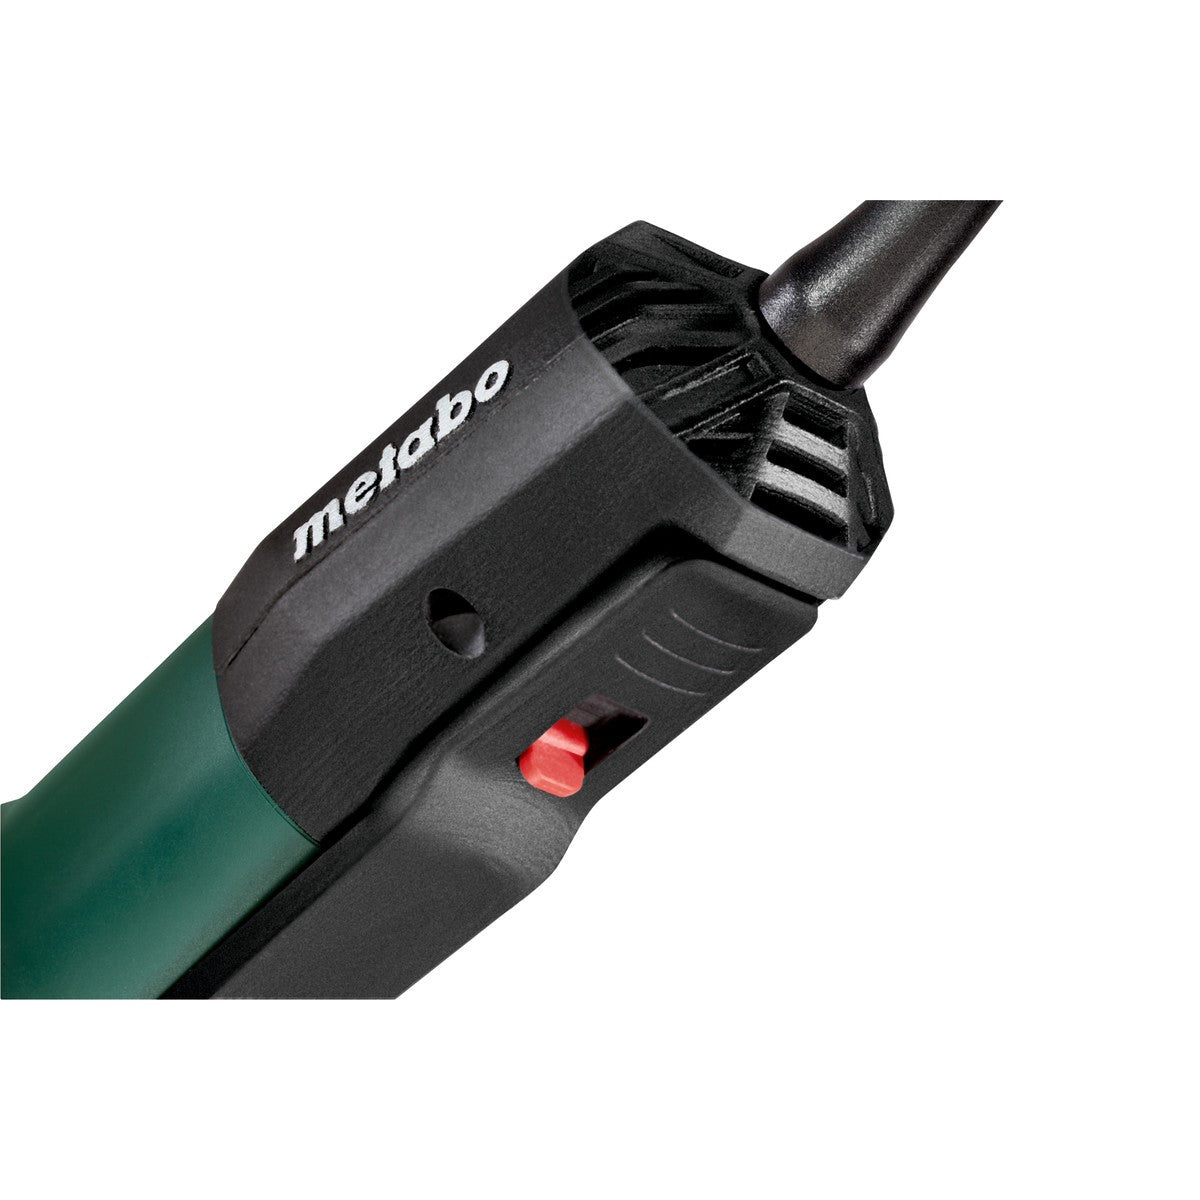 Metabo (613069420) 5 inch Flat Head Angle Grinder w NonLock Paddle Switch 8 Amp image 2 of 2